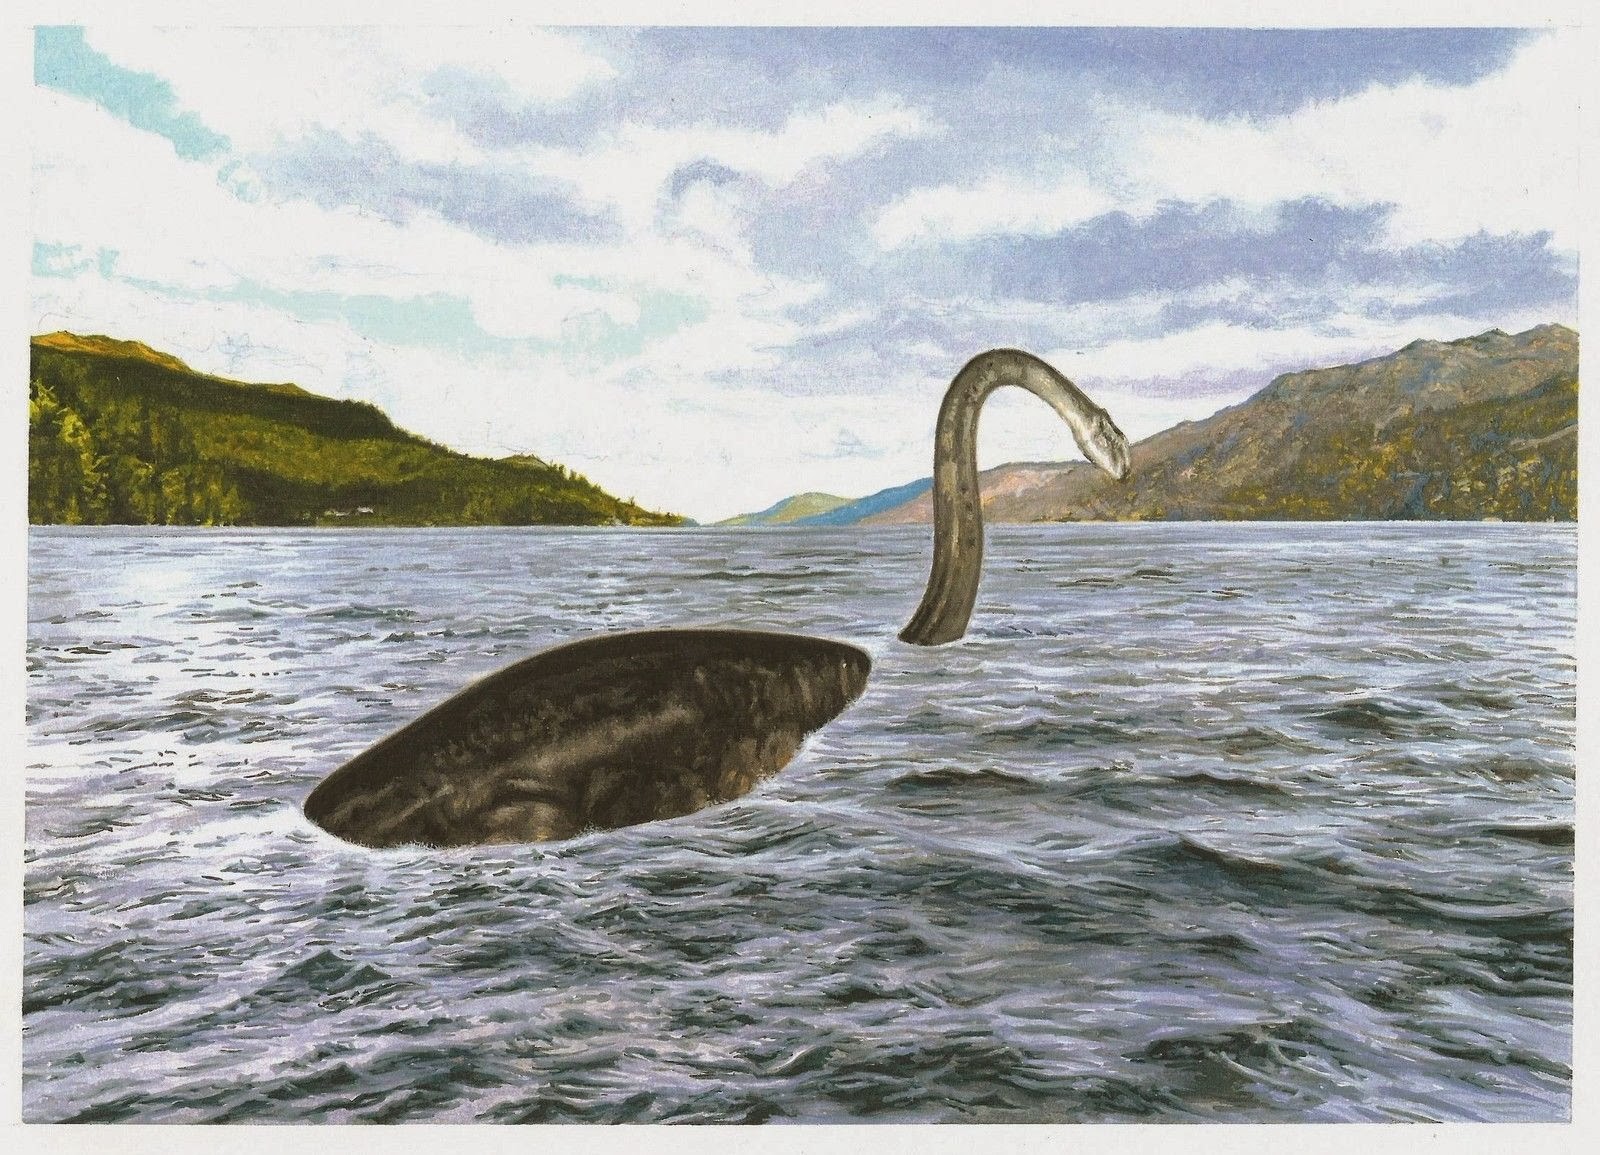 1600x1155 Loch Ness Monster Another Loch Ness Monster Painting - Lo...